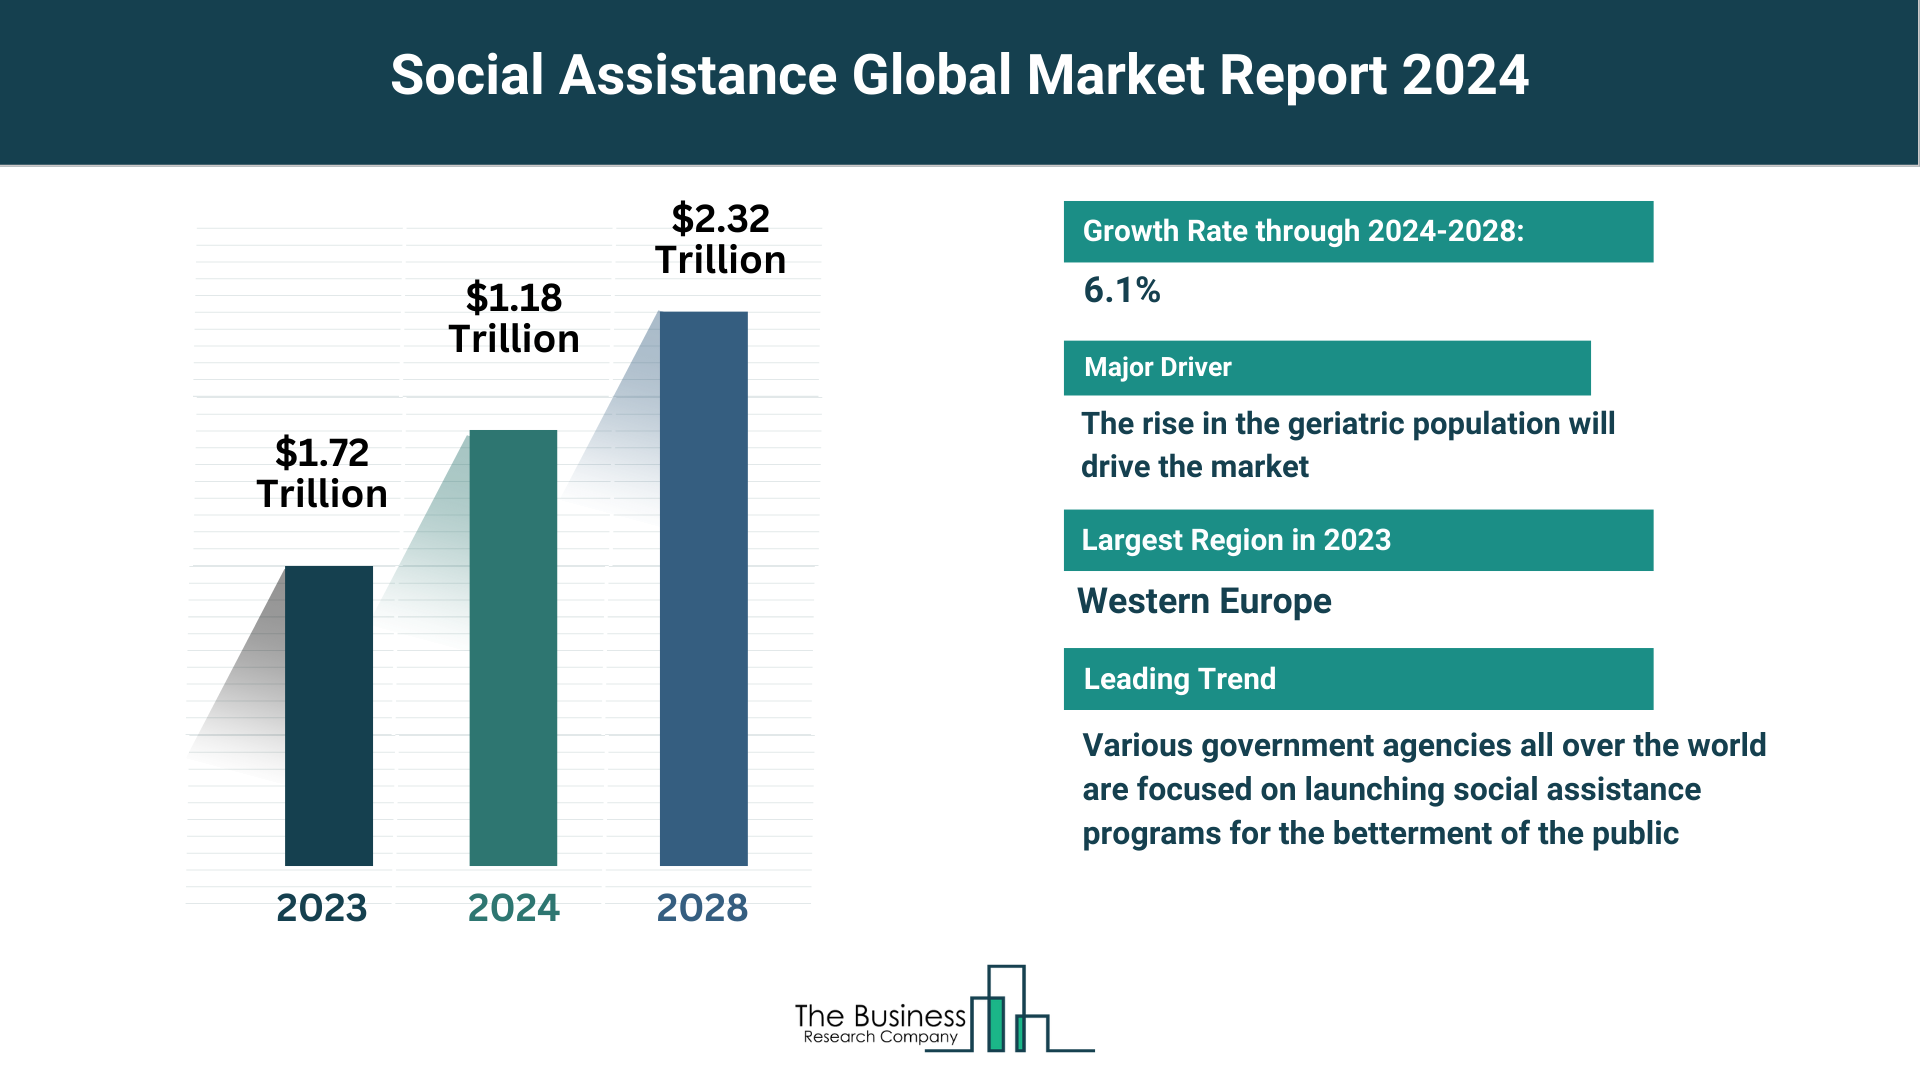 Global Social Assistance Market Overview 2024: Size, Drivers, And Trends